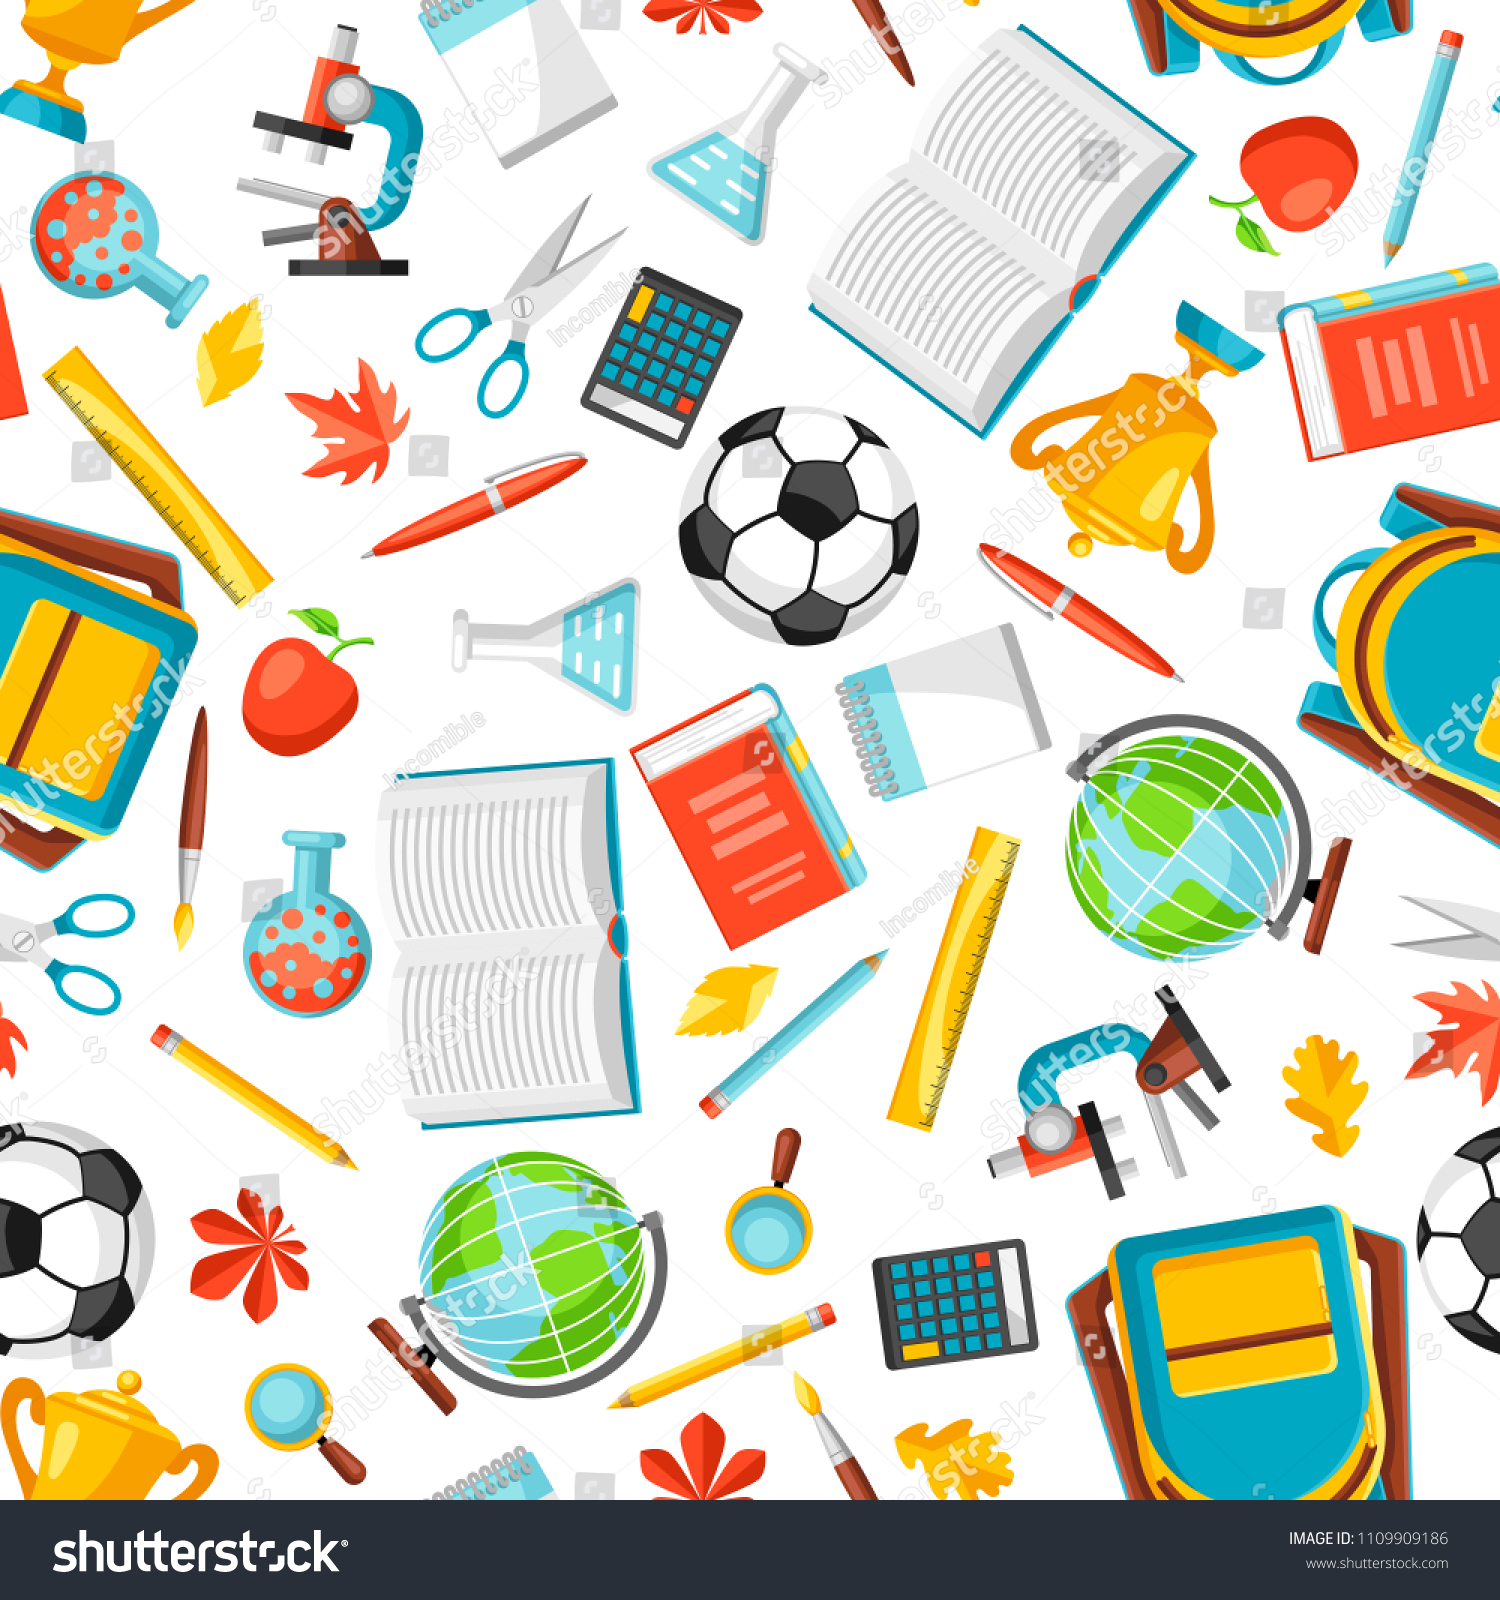 School Seamless Pattern Education Items Colorful Stock Vector (Royalty ...